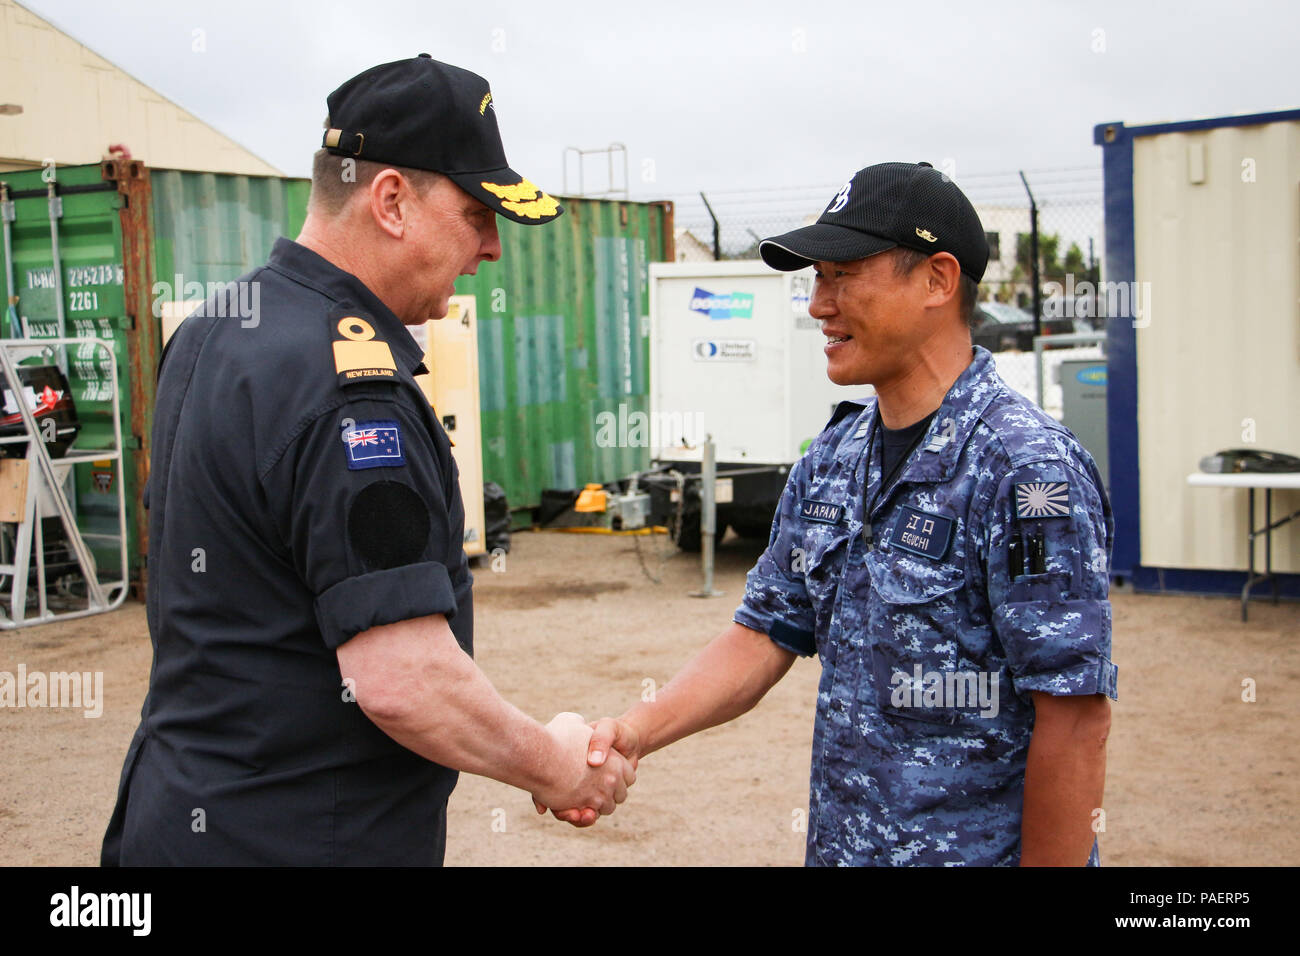 180717-N-LR347-011 NAVAL BASE POINT LOMA, Calif.  (July 17, 2018) - Royal New Zealand Navy (RNZN) Commodore Tony Millar, maritime component commander and representative of the Chief of Navy (New Zealand), shakes hands with an officer from the Japan Maritime Self Defense Force serving with Mine Warfare Task Force during a visit to Naval Base Point Loma July 17. Millar visited the undersea mine countermeasures task group led by the RNZN during their participation in the Rim of the Pacific (RIMPAC) exercise  in the Southern California area of operations. Twenty-five nations, 46 ships, five submar Stock Photo